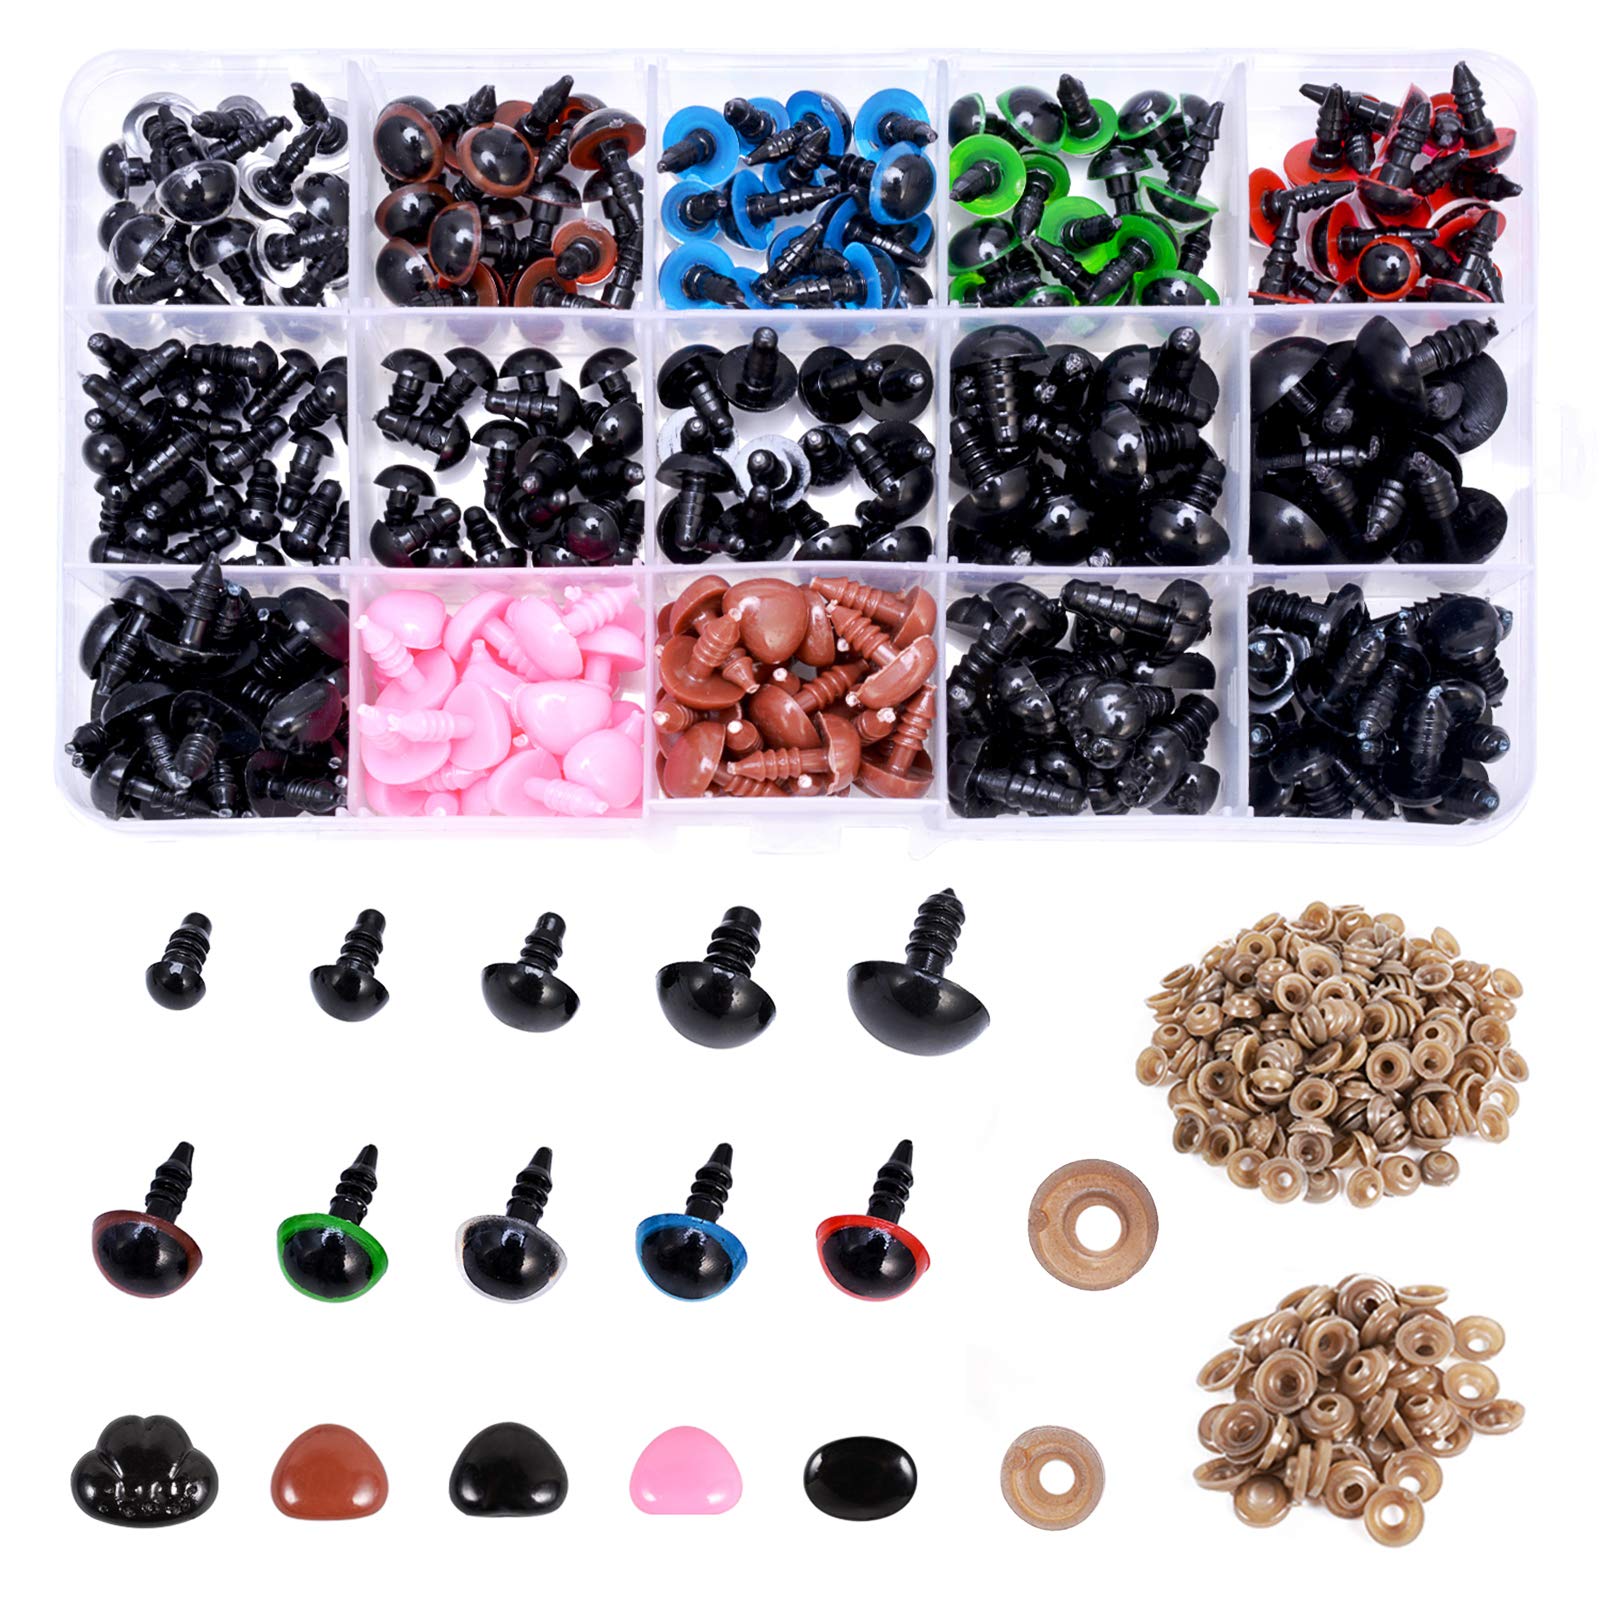 Plastic Safety Eyes and Noses with Washers 570 Pcs Craft Doll Eyes and  Teddy Bear Nose for Amigurumi Crafts Crochet Toy and Stuffed Animals  (Assorted Sizes) Colorful